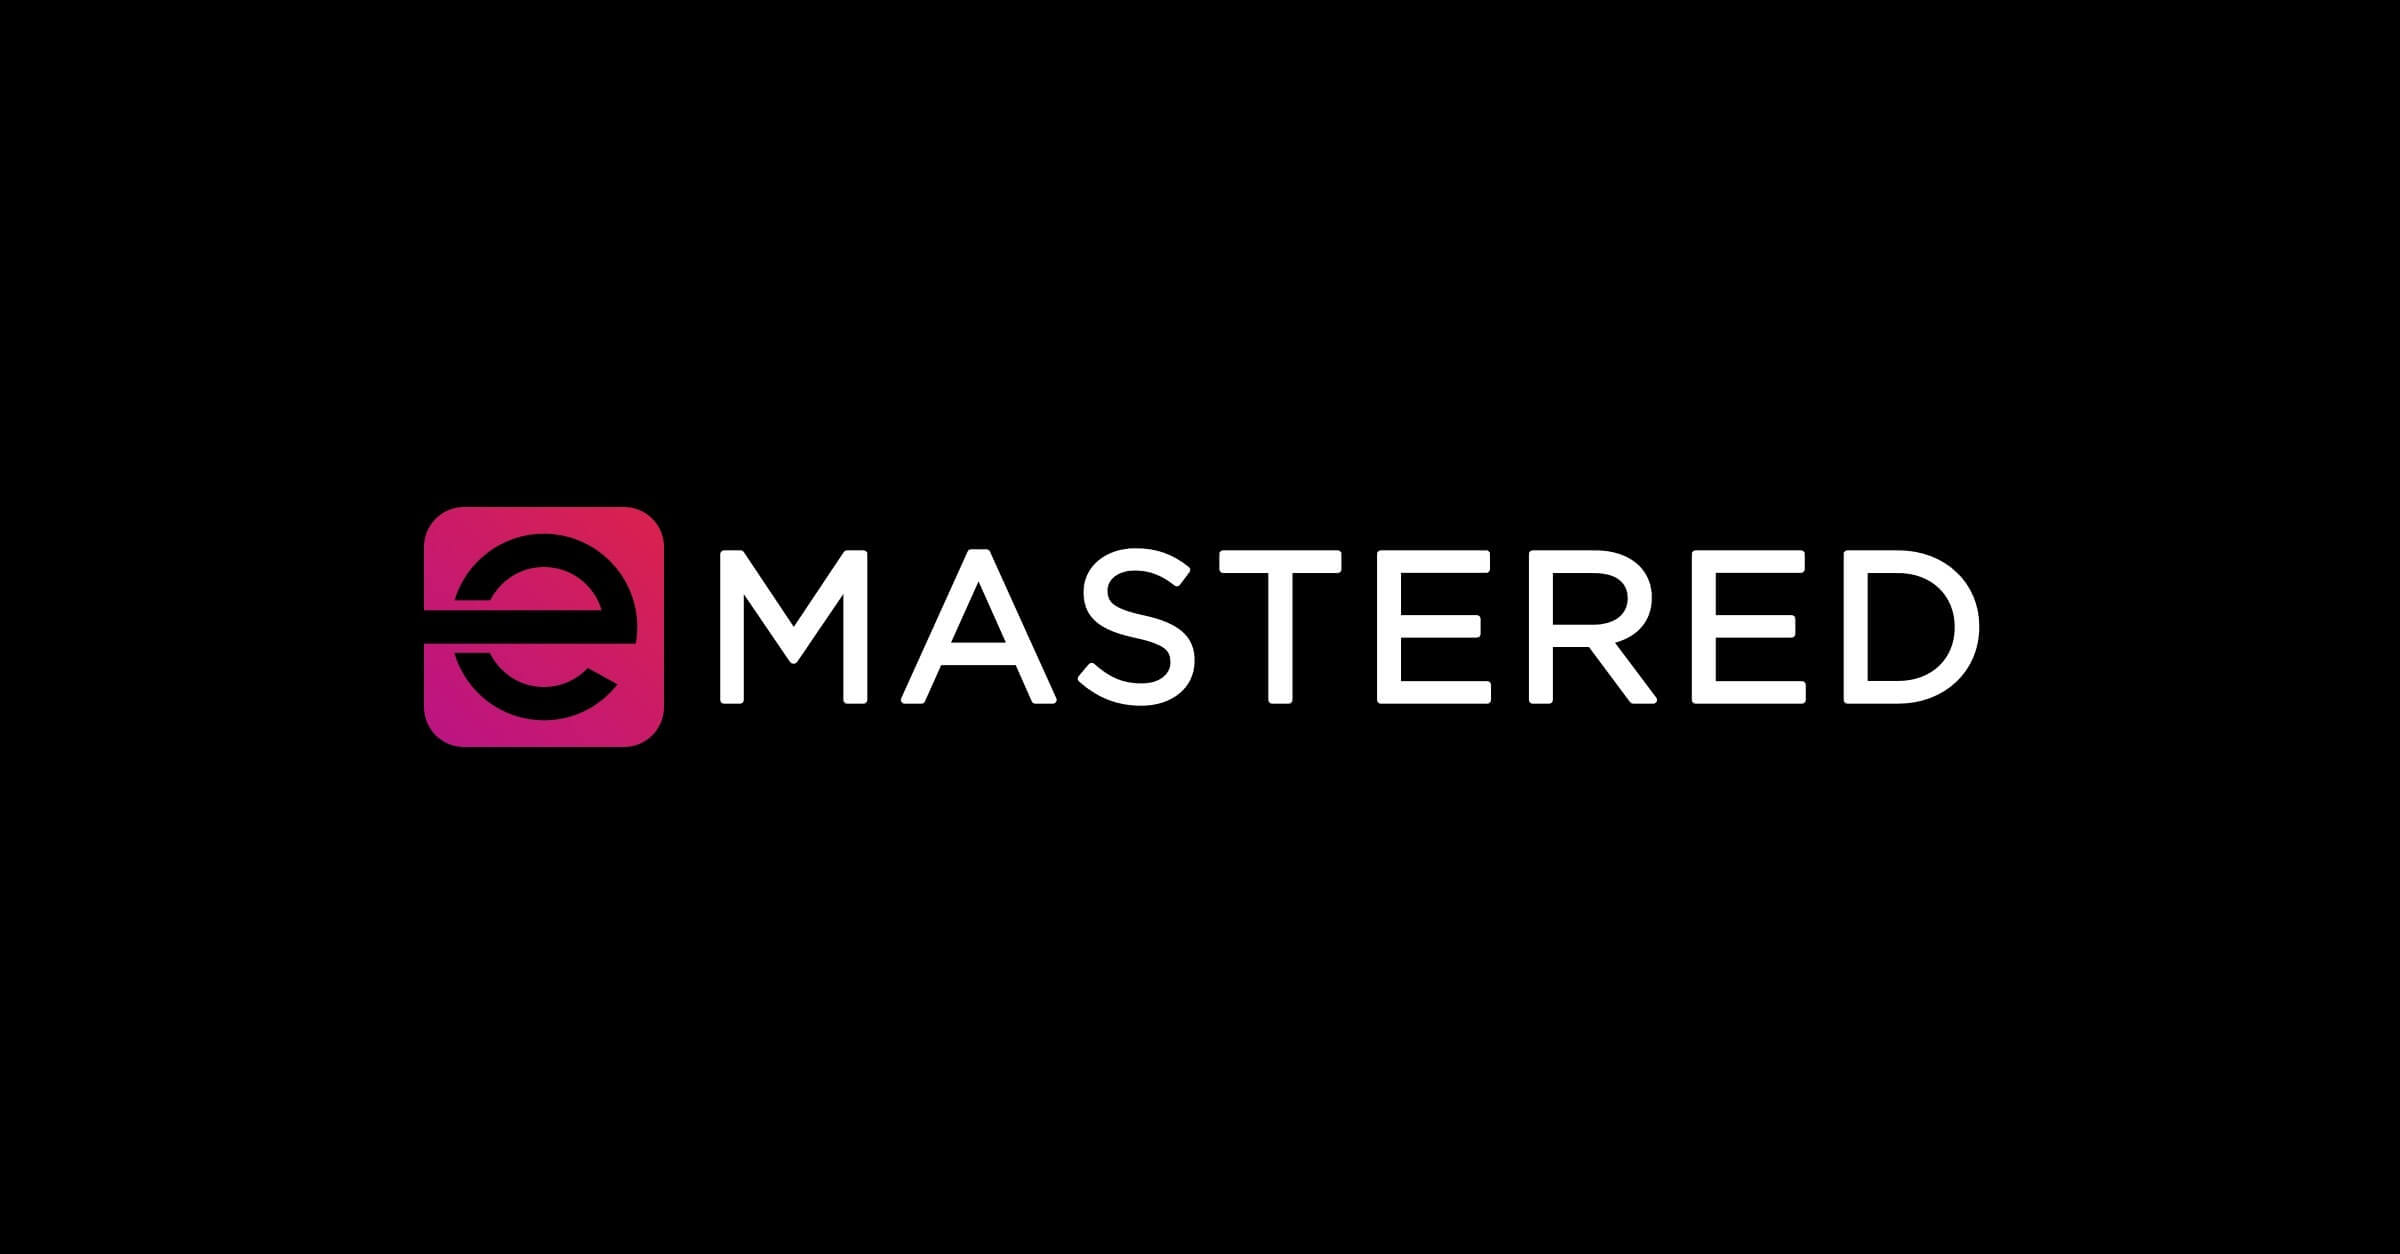 eMastered - An online mastering tool to improve the sound of music tracks